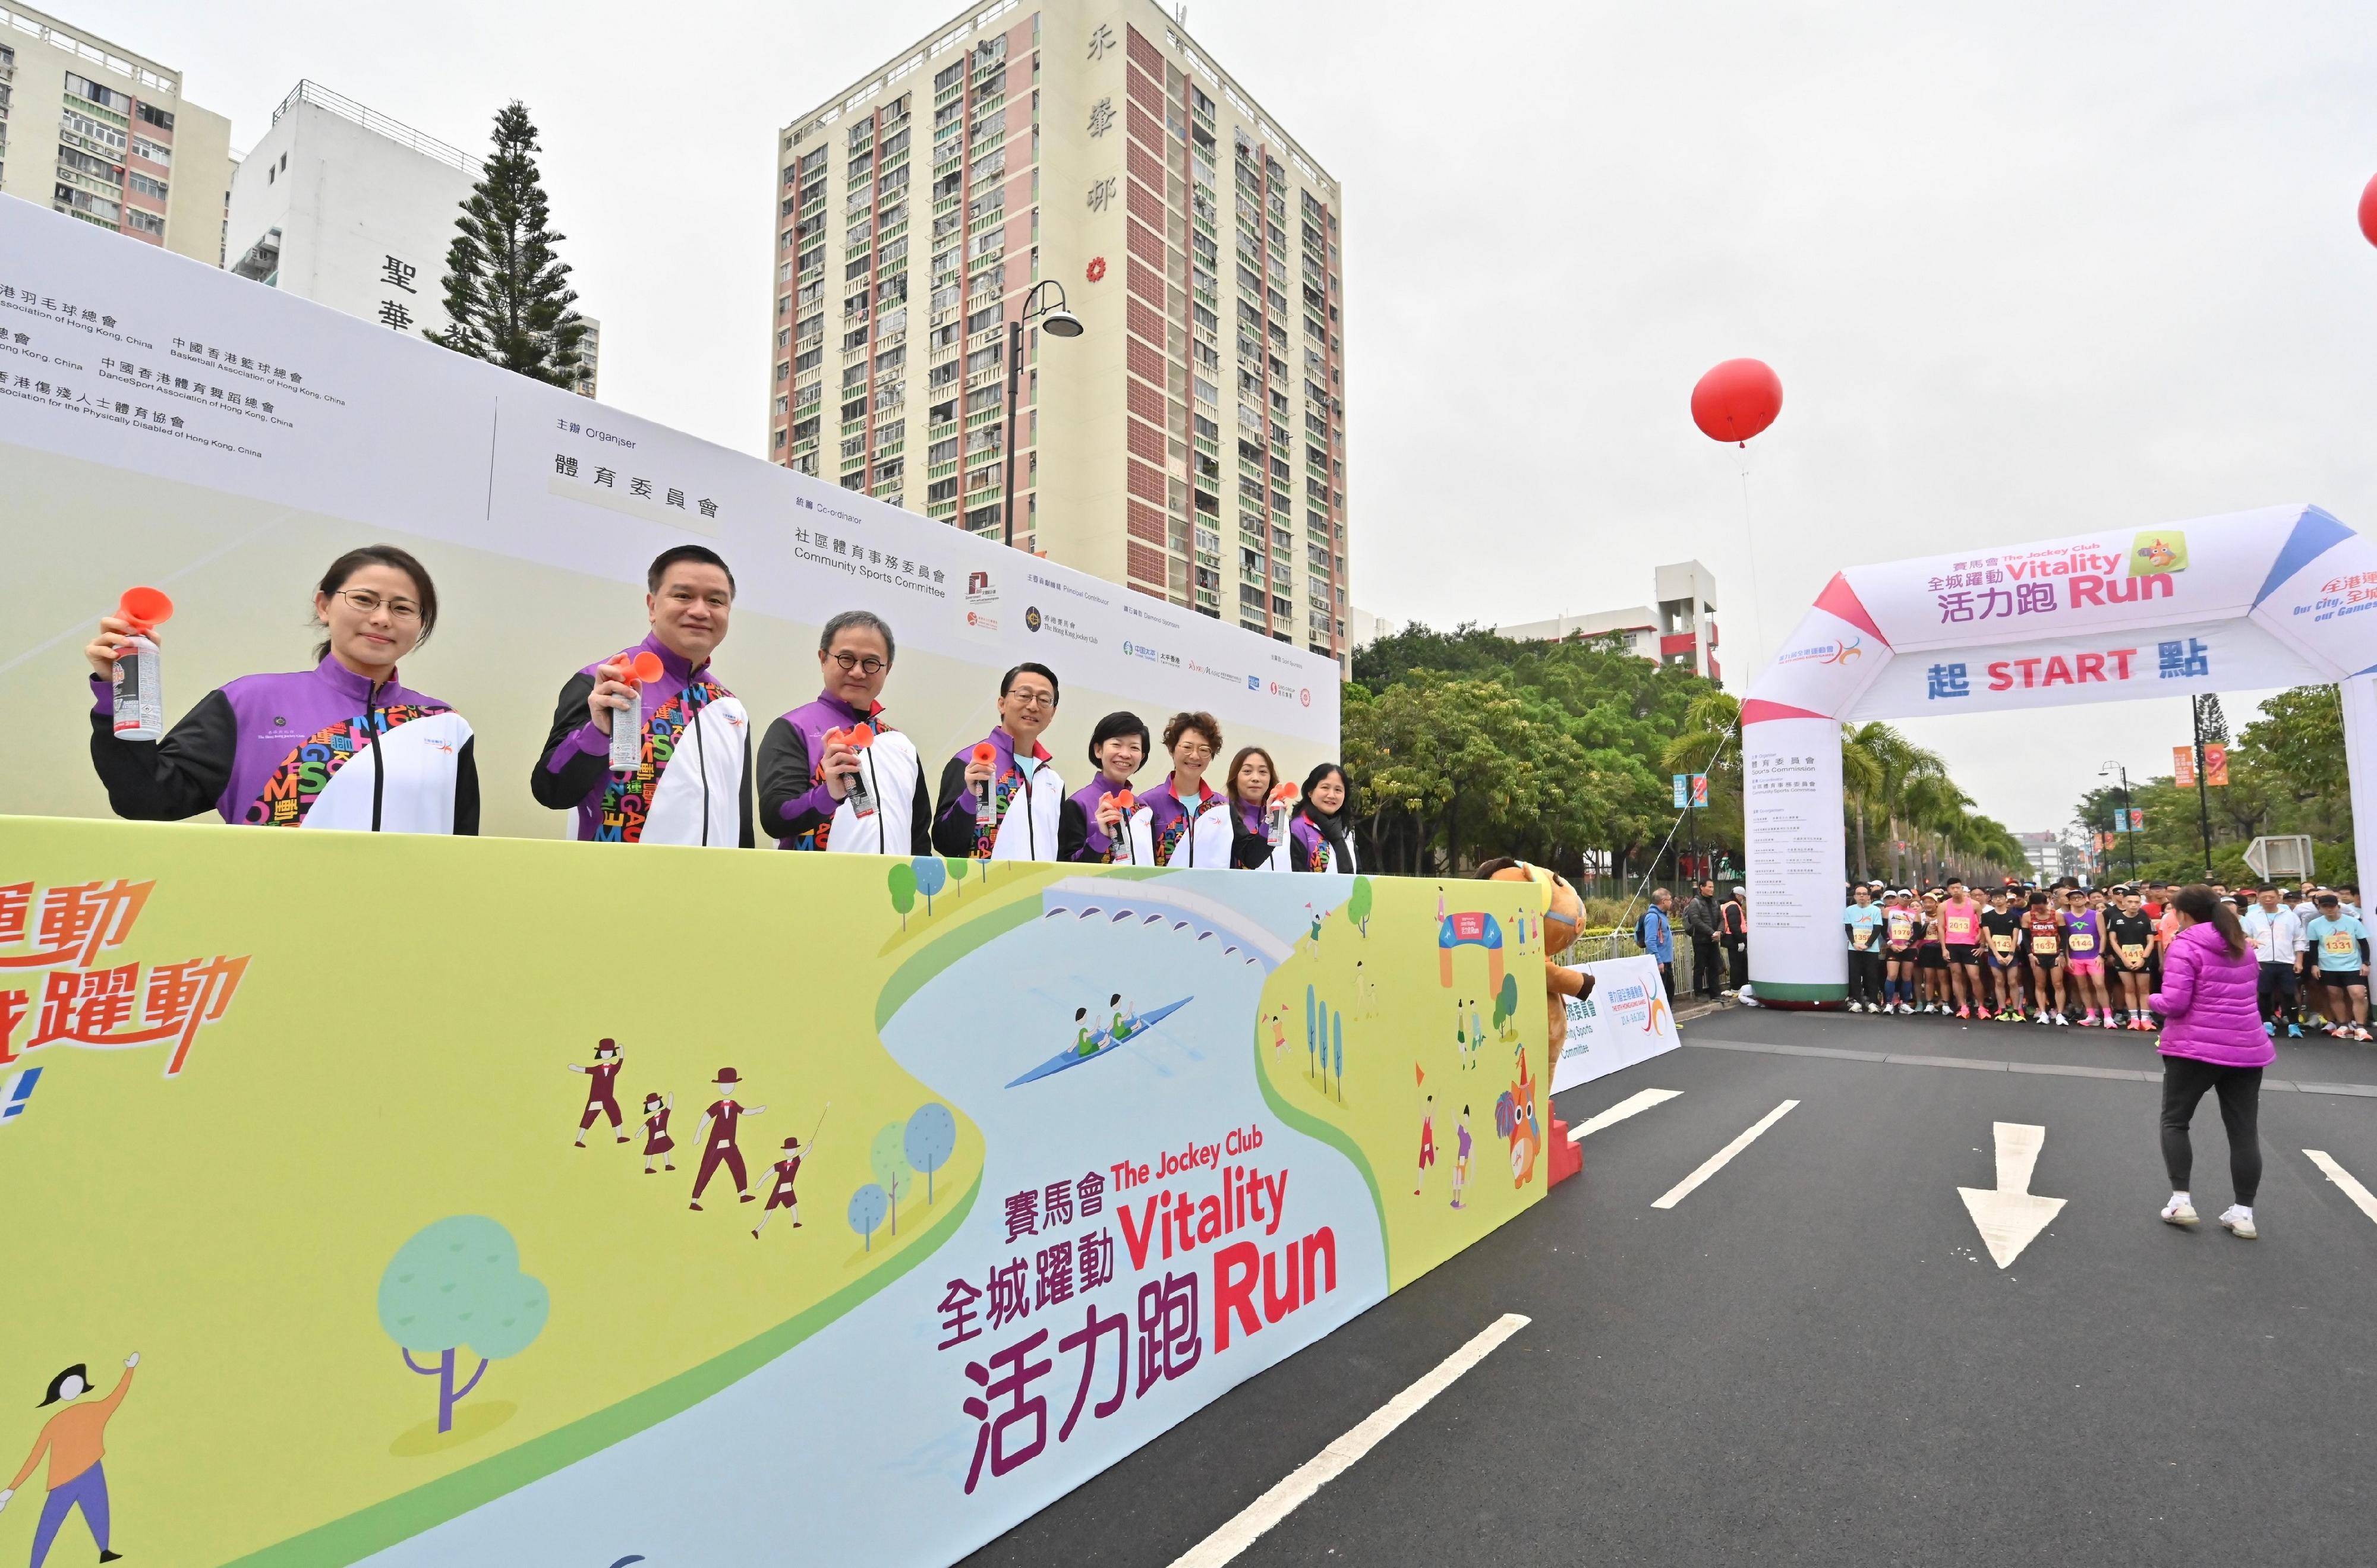 The 9th Hong Kong Games' Jockey Club Vitality Run (HKG) was held alongside the Shing Mun River in Sha Tin this morning (March 3). Officiating guests at the starting ceremony were the Permanent Secretary for Culture, Sports and Tourism, Mr Joe Wong (third left); the Director of Leisure and Cultural Services, Mr Vincent Liu (fourth left); the Chairman of the 9th HKG Organising Committee, Professor Patrick Yung (second left); the Executive Manager of Charities (Sports & Institute of Philanthropy) of the Hong Kong Jockey Club, Ms Donna Tang (fourth right); the Honorary Treasurer of the Hong Kong, China Association of Athletics Affiliates, Ms Irene Chan (first left); and the Deputy Director of Leisure and Cultural Services (Leisure Services), Miss Winnie Chui (third right).
